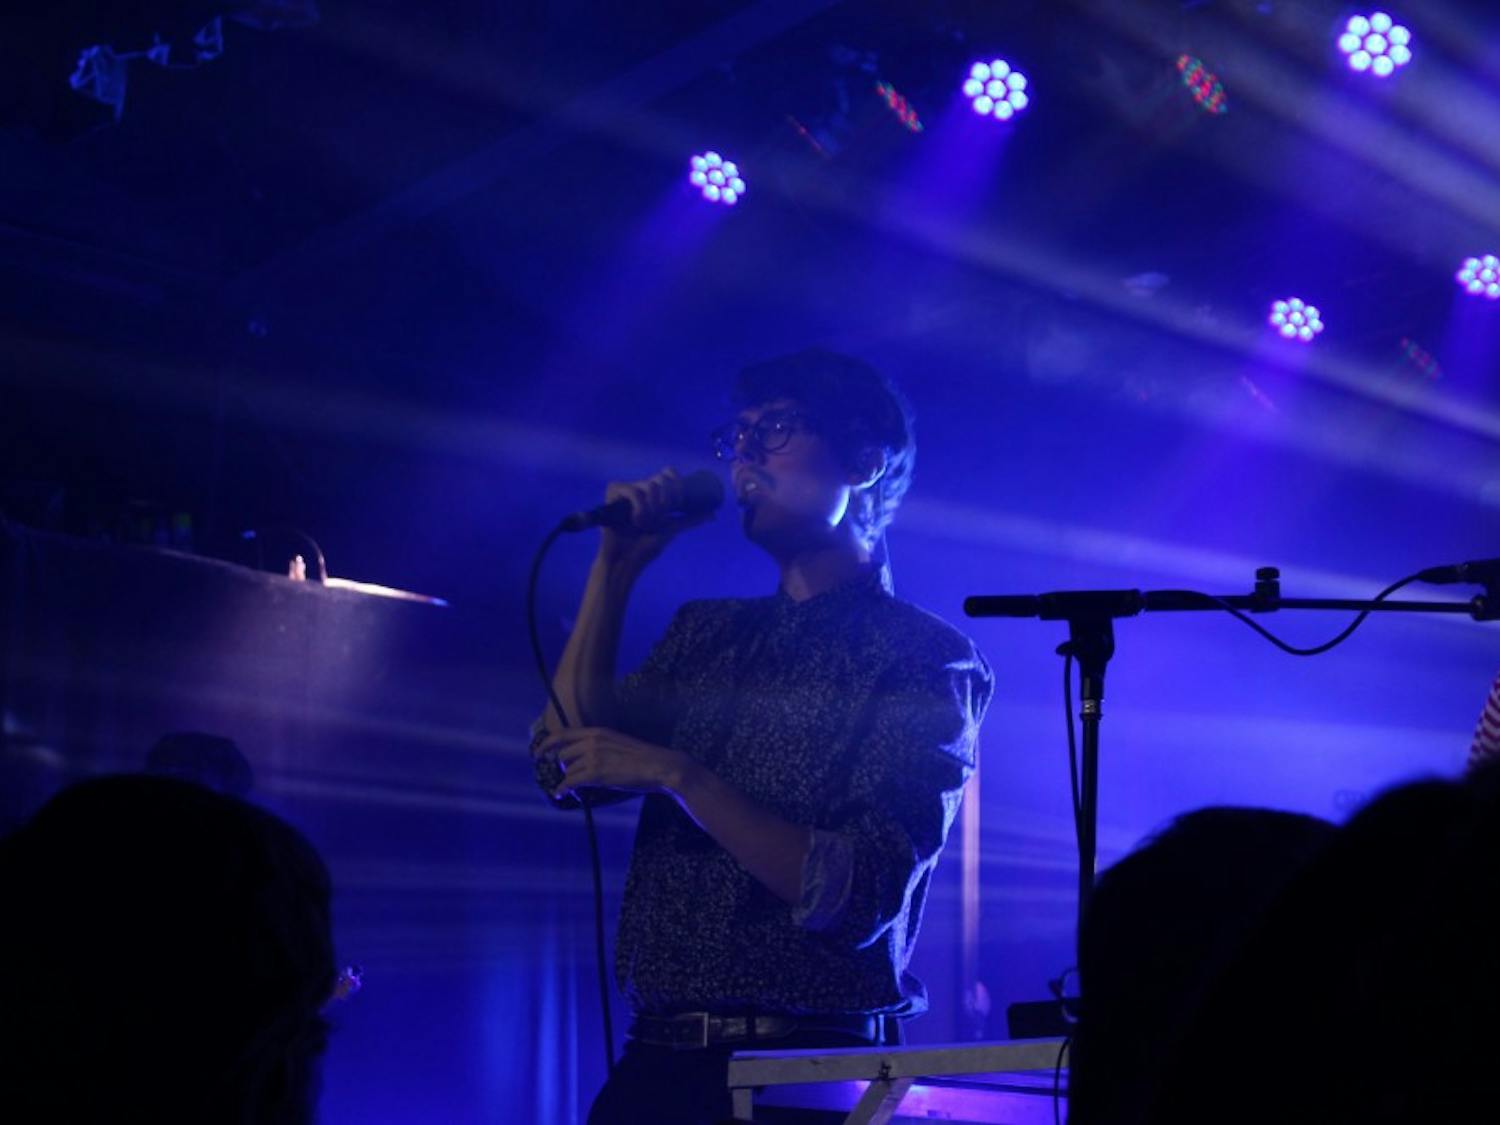 Joywave lead singer&nbsp;Daniel Armbruster had a&nbsp;quirky vibrancy that&nbsp;was clear from the start.